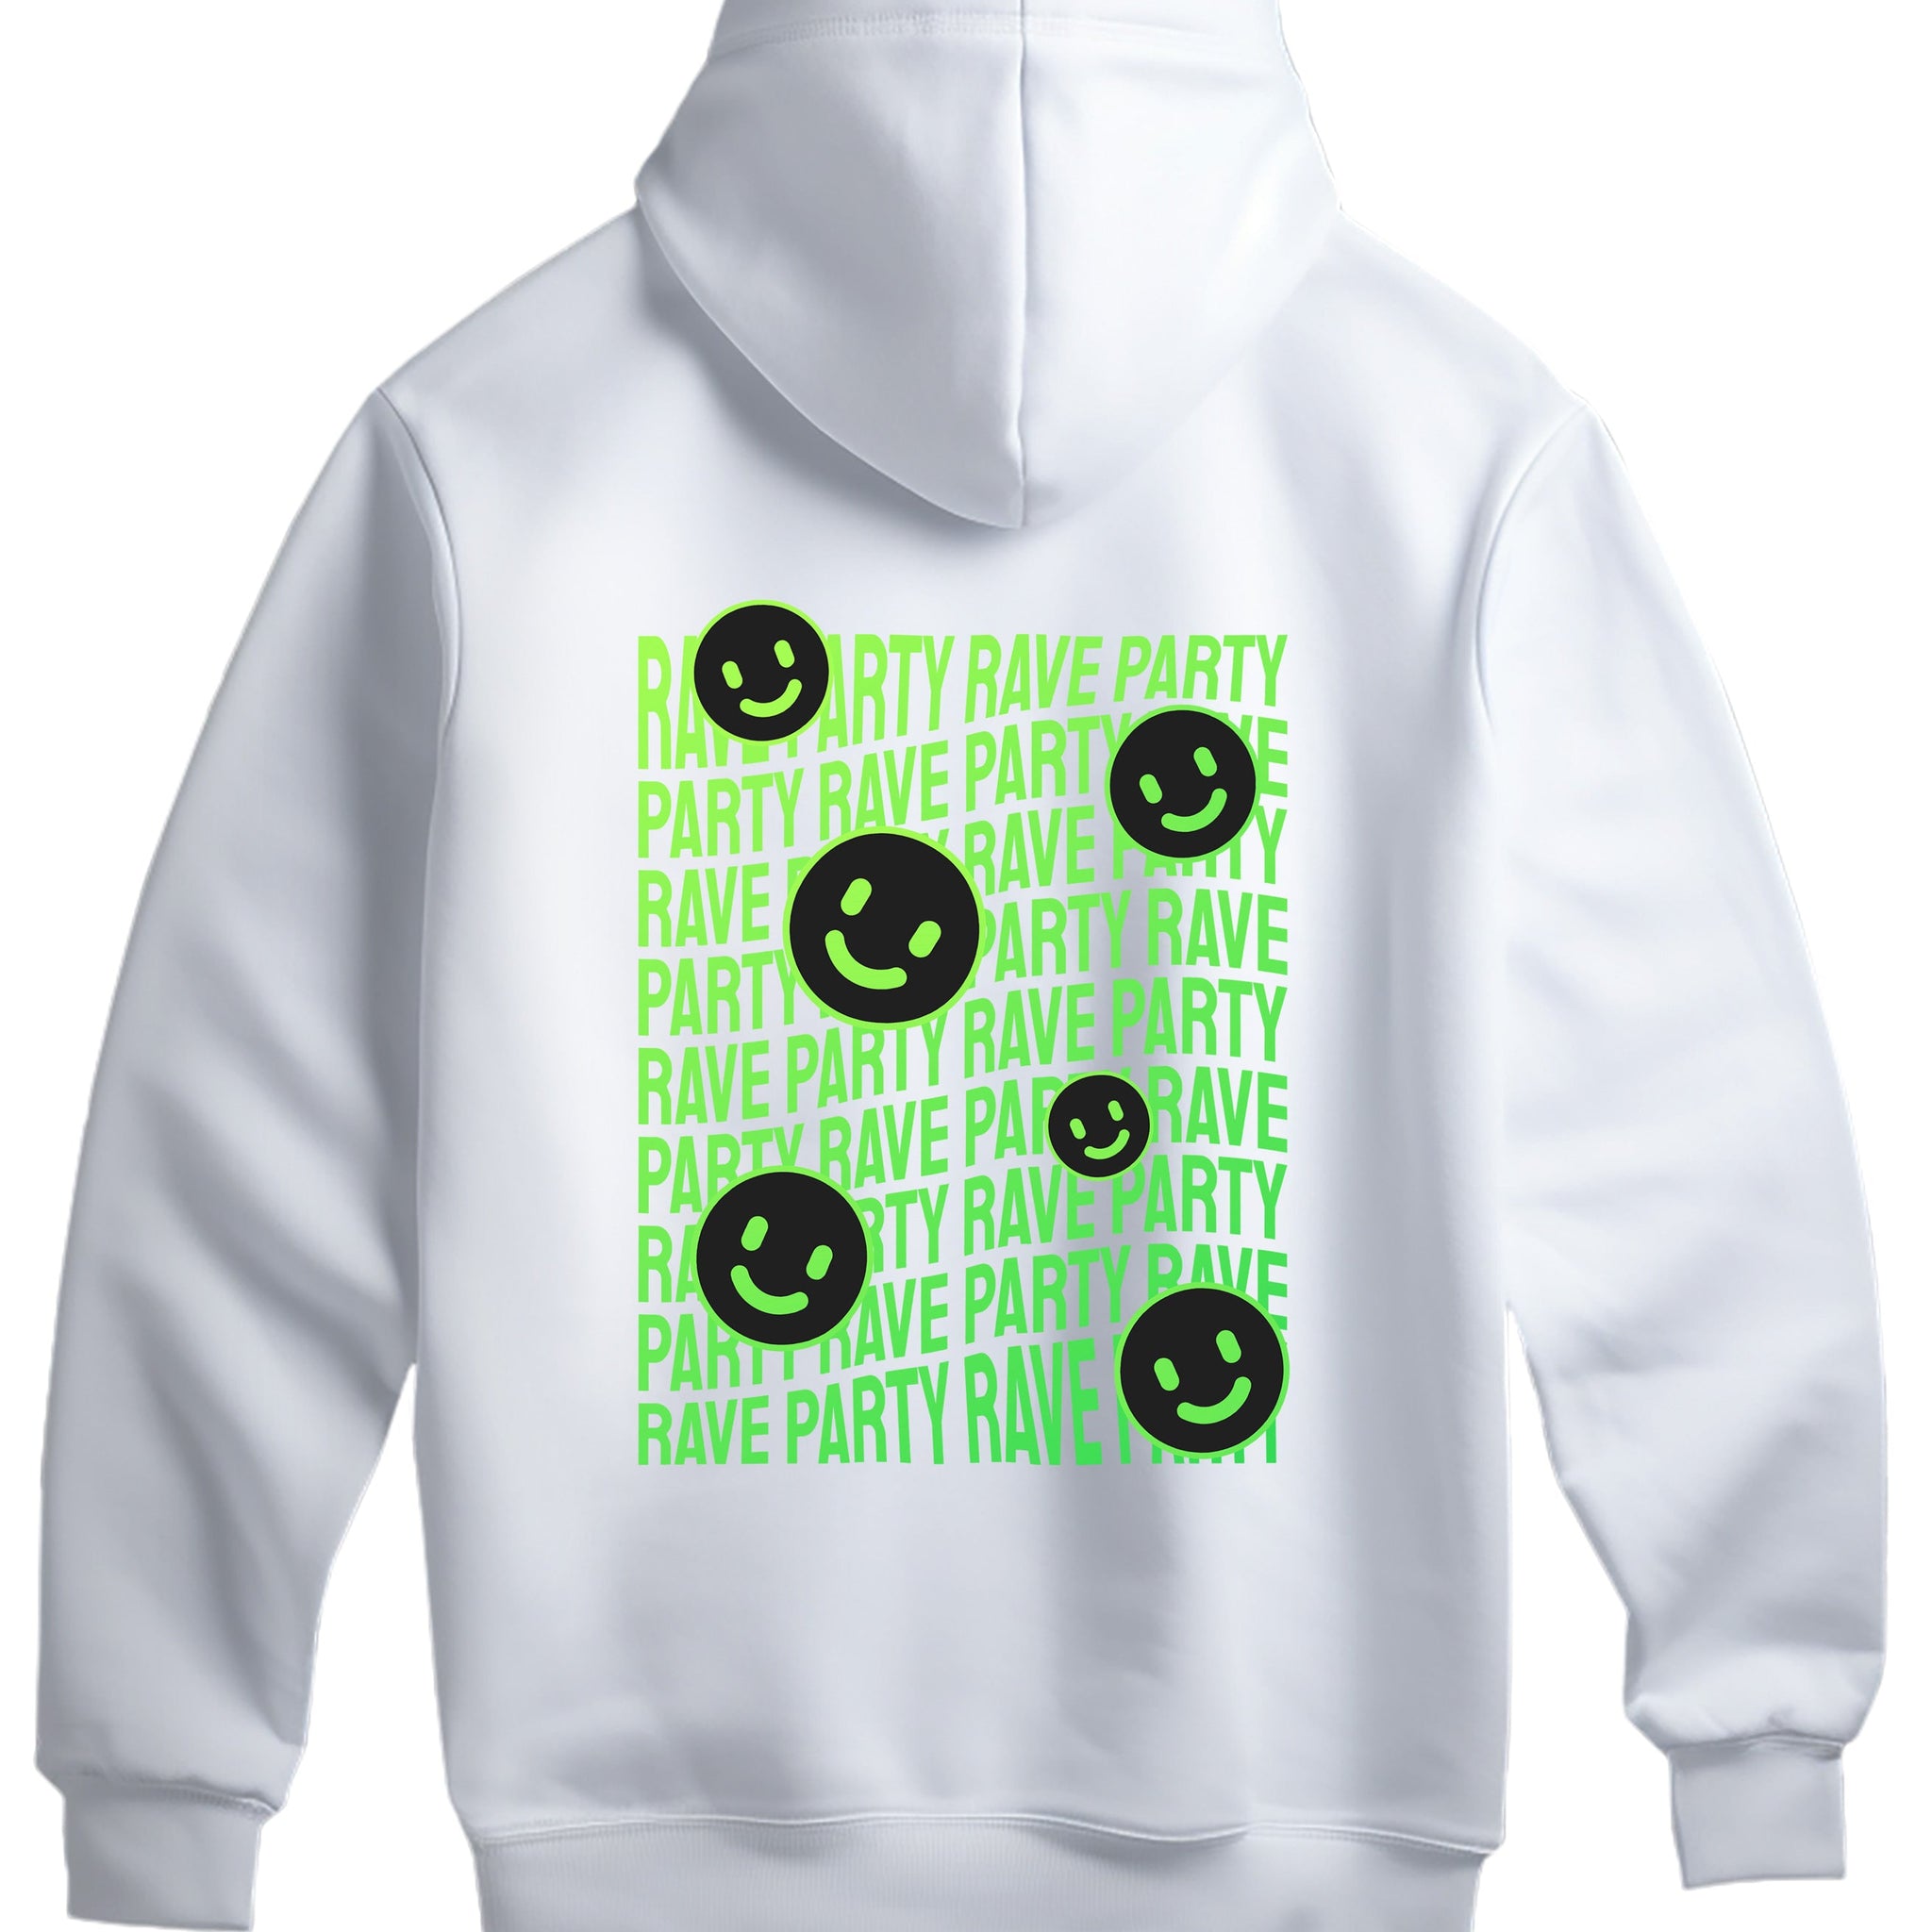 Rave Party Oversize Hoodie